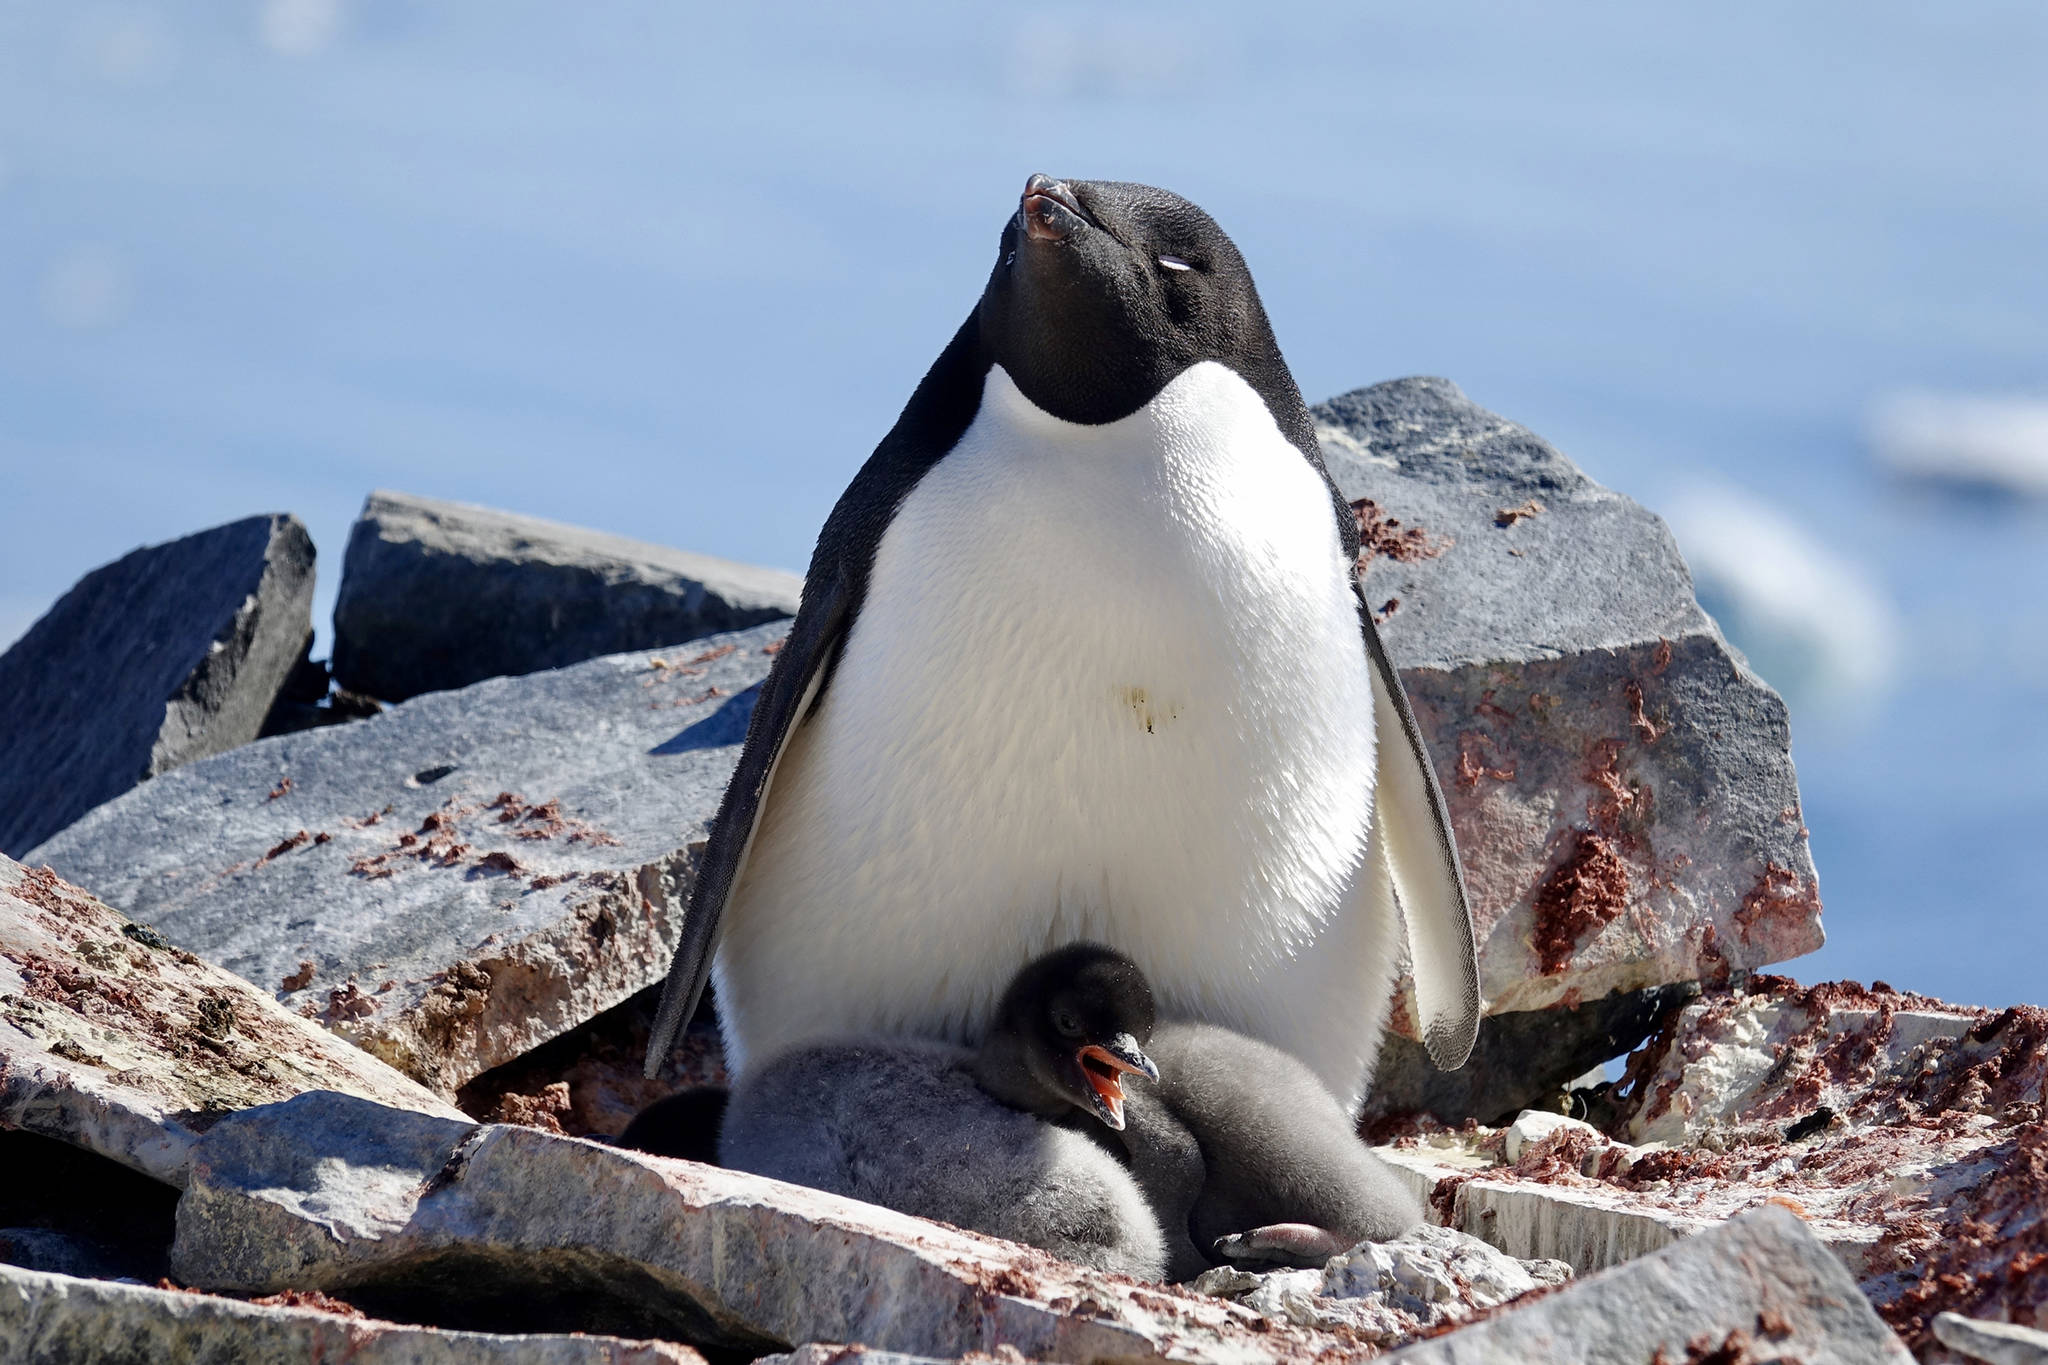 An Adélie penguin stands with a chick at Paulet Island in the Weddell Sea. Jack Kreinheder saw four different breeds of penguins during a recent trip to Antarctica. (Courtesy Photo | Jack Kreinheder)